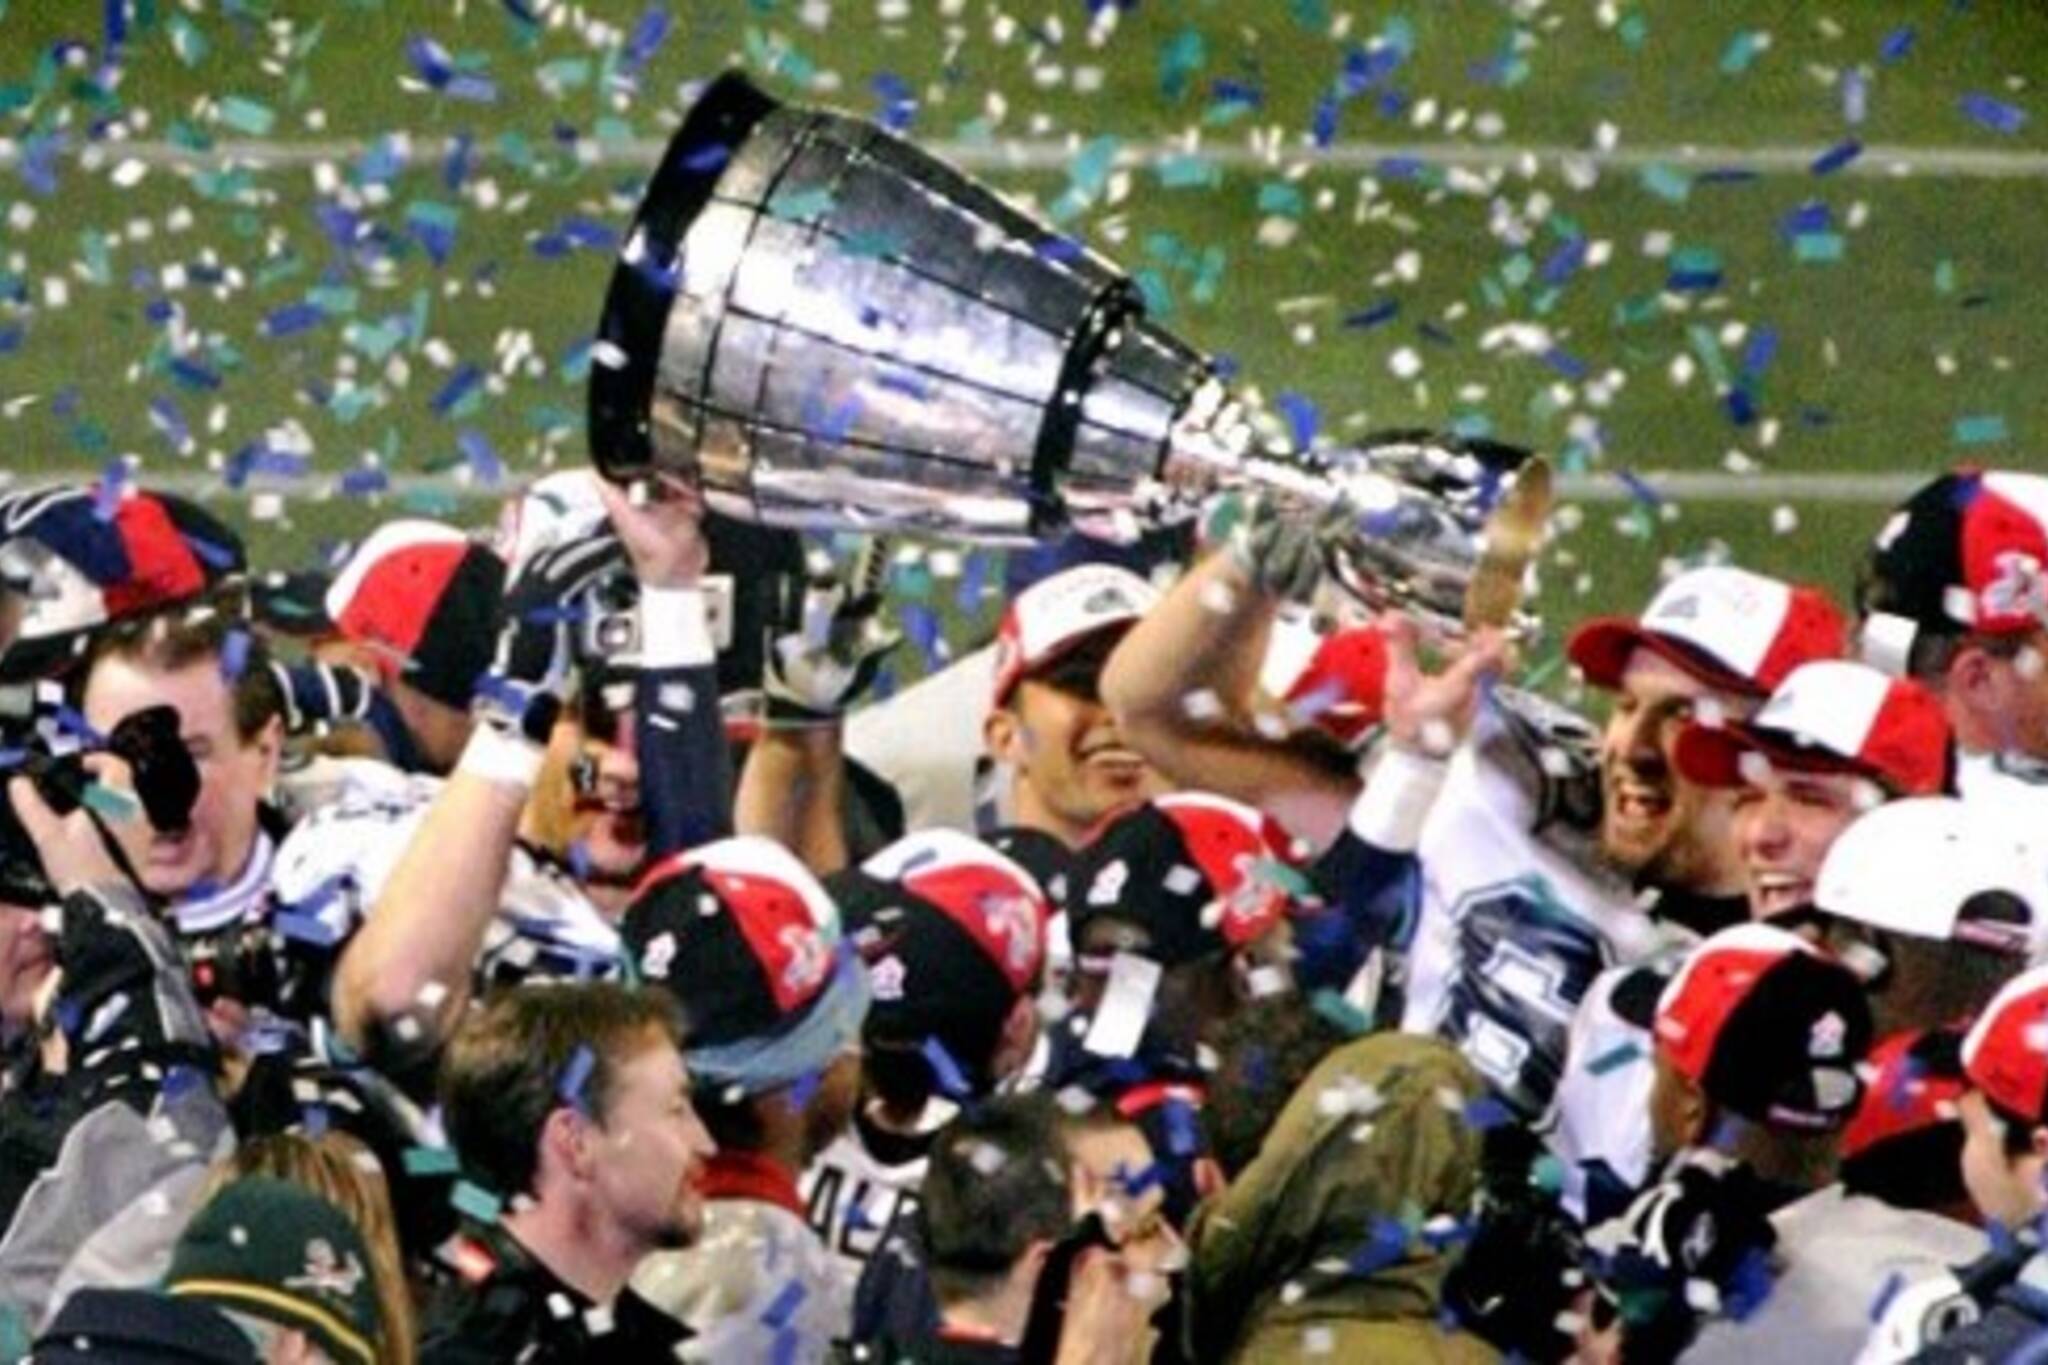 Argos celebrate Grey Cup victory in 2004 under coach Pinball Clemons, hired by J.I. Albrecht